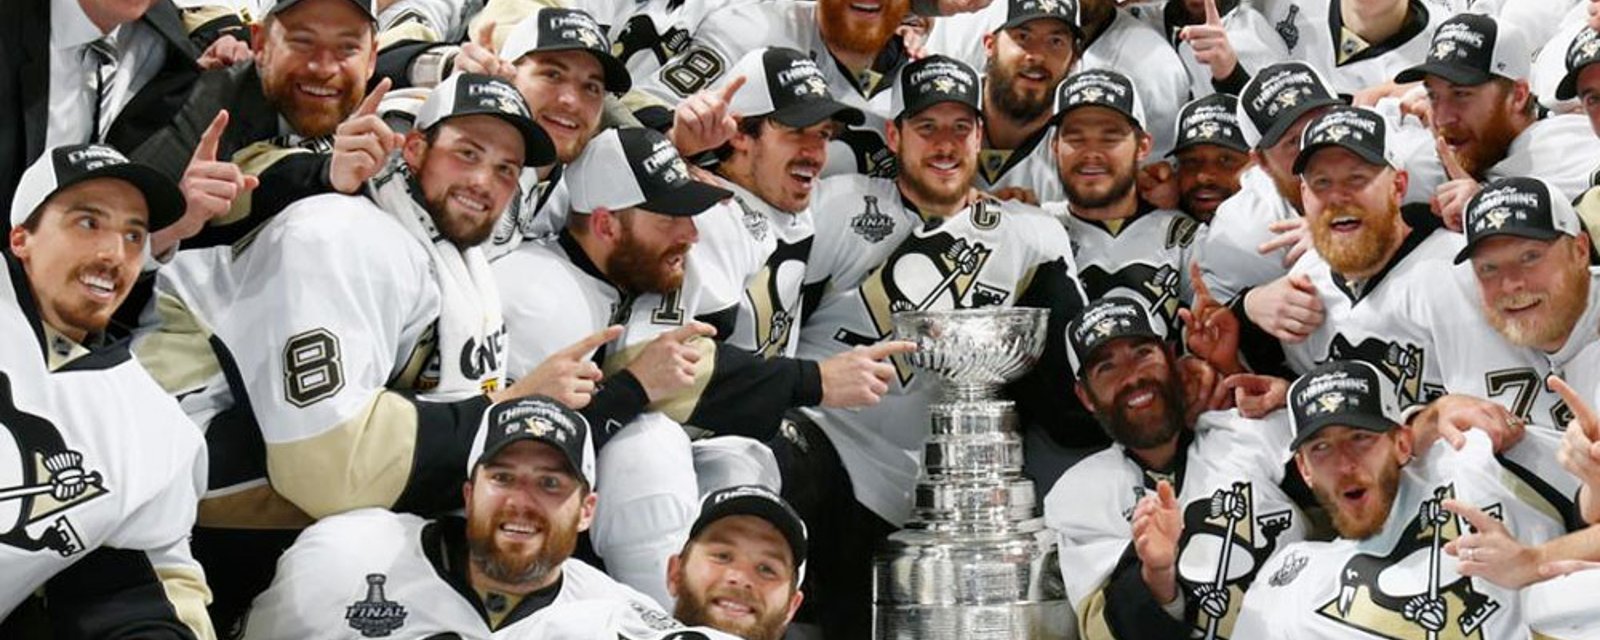 Breaking: Four time Stanley Cup champion officially retires, joins NHL front office staff